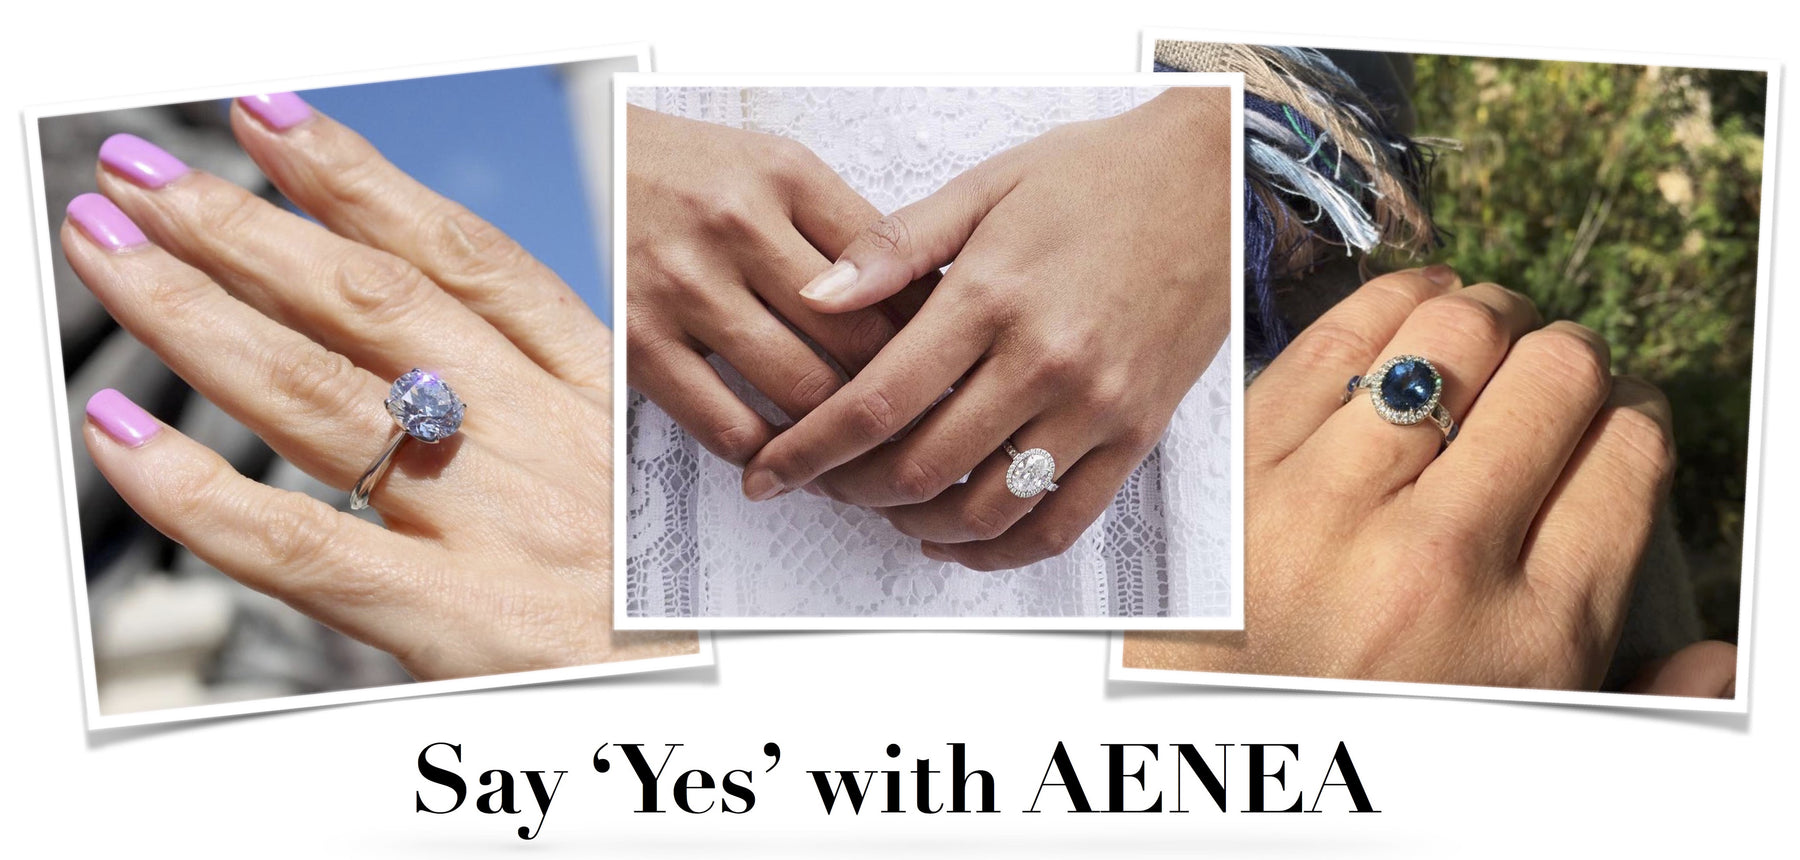 Say "Yes" to an AENEA Engagement Ring